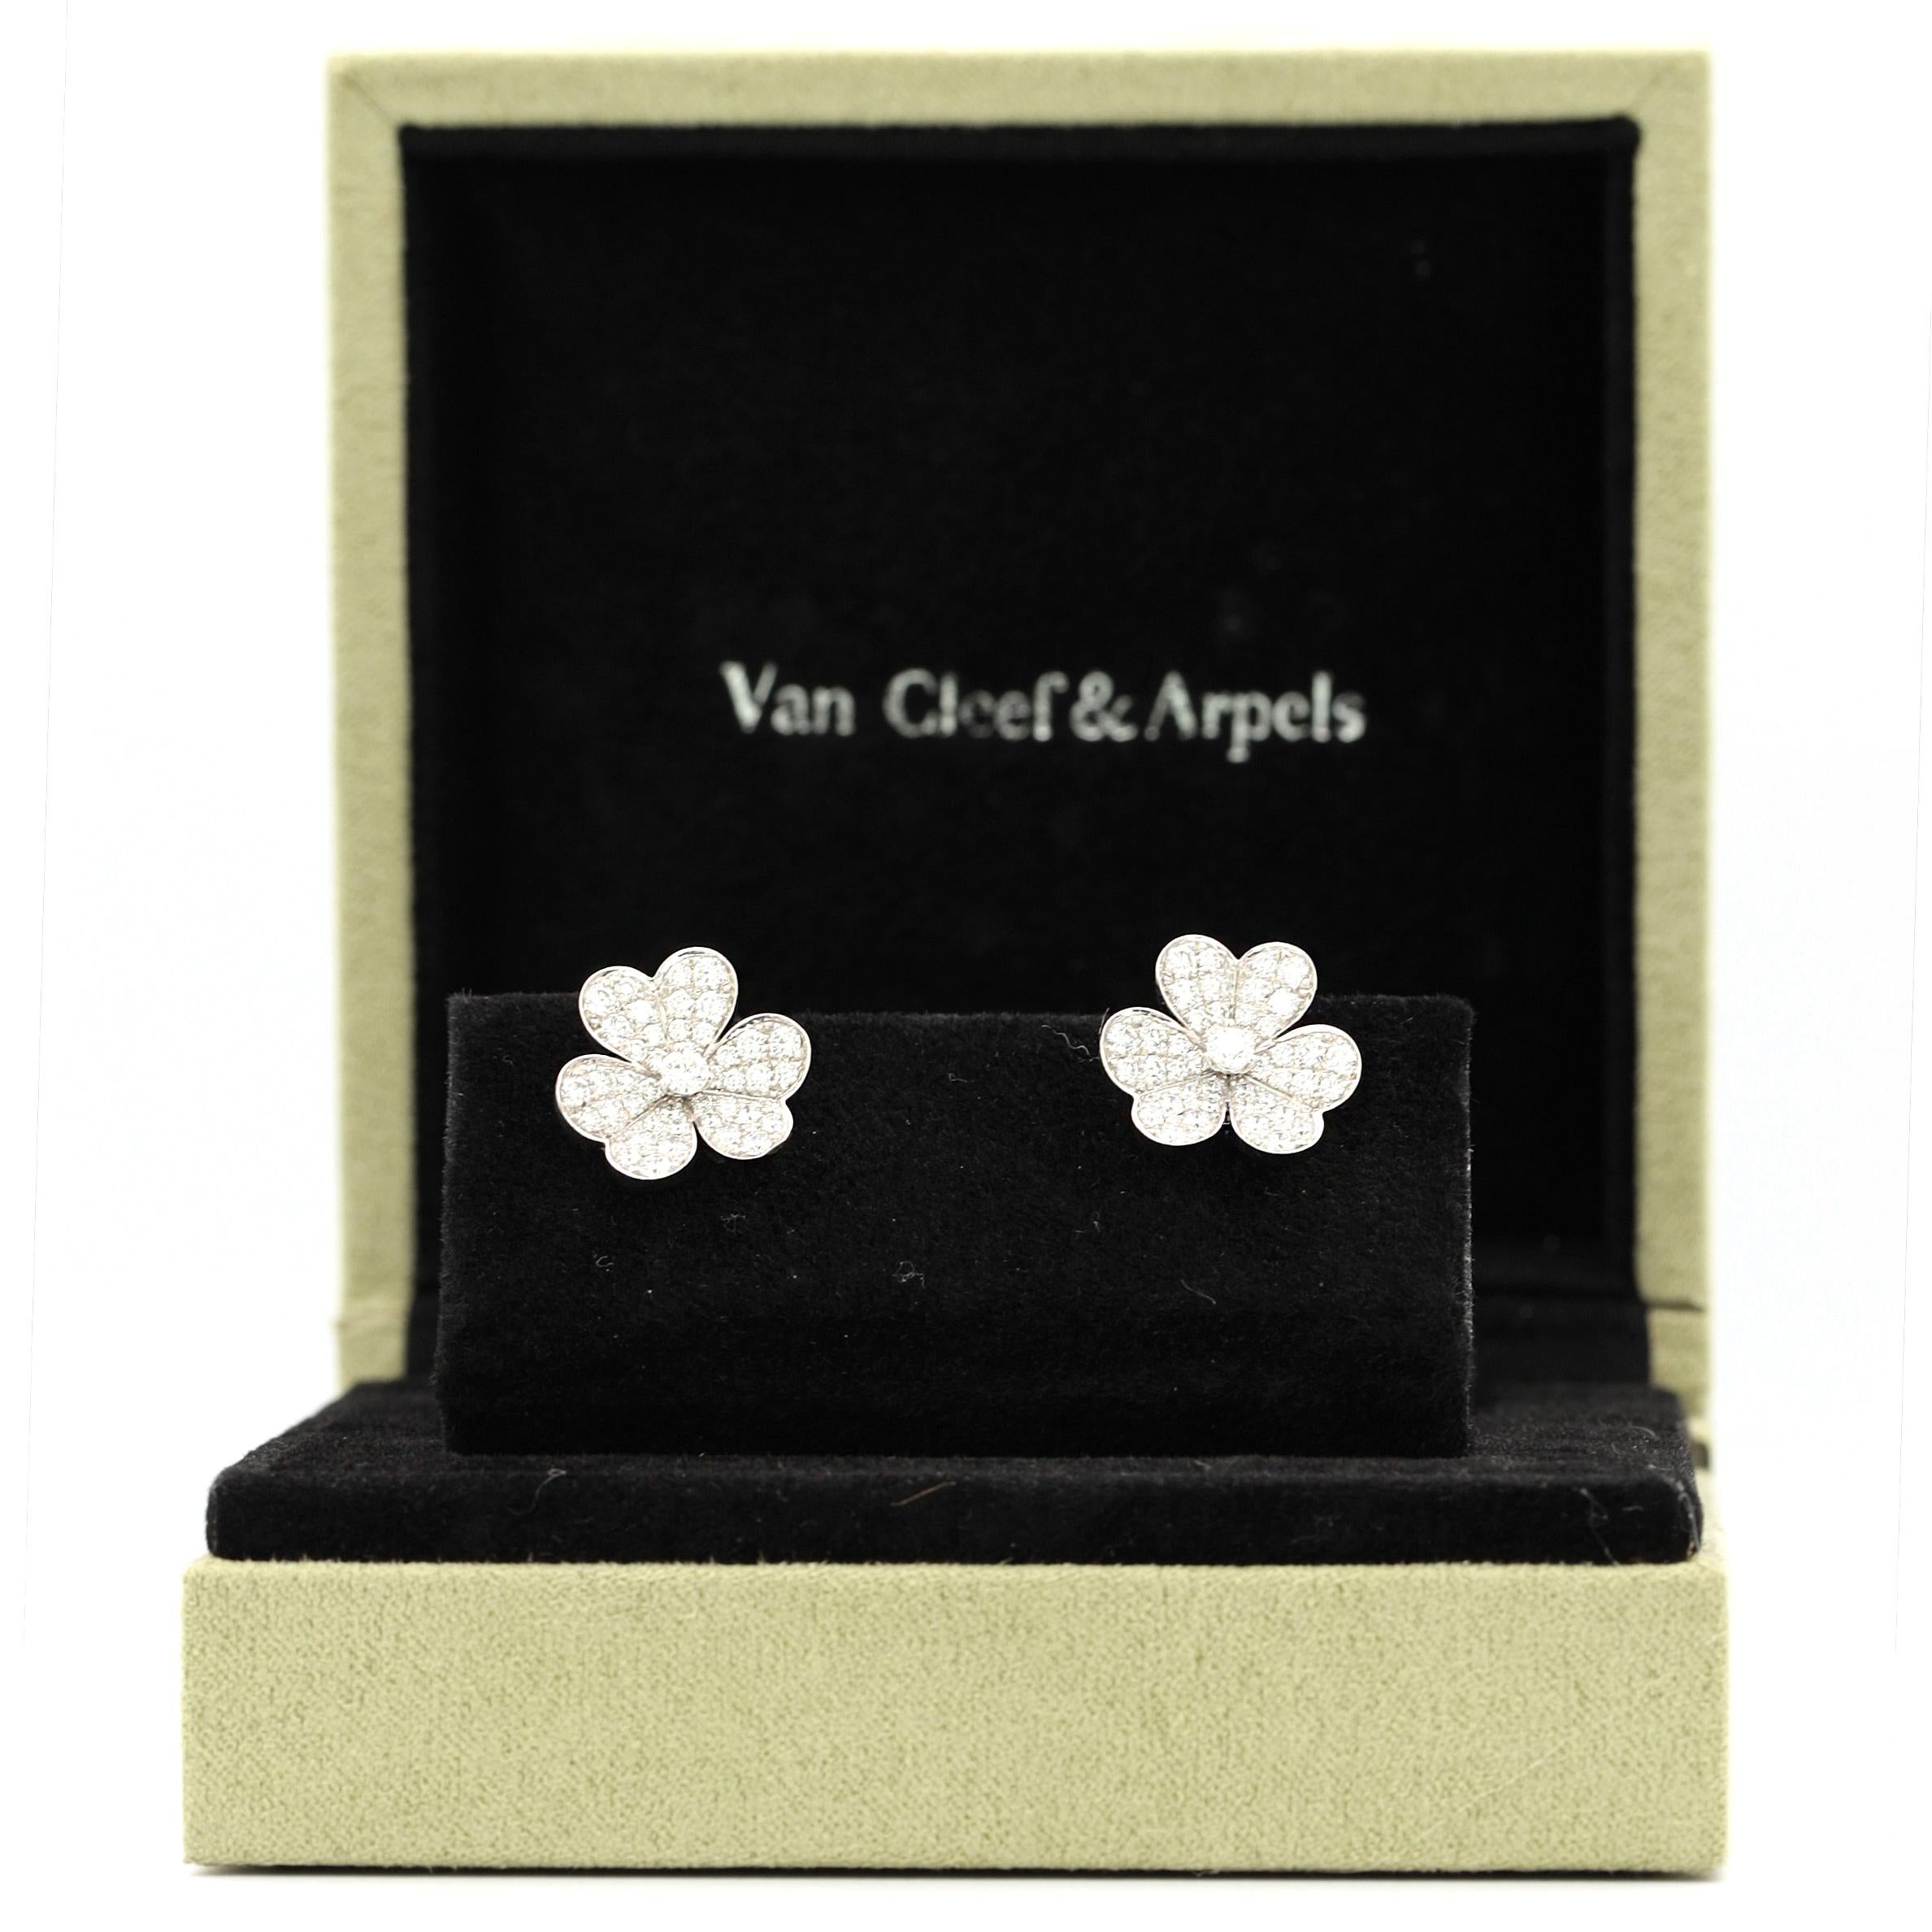 Contemporary Van Cleef & Arpels Frivole Earrings with White Diamonds and 18 Karat White Gold